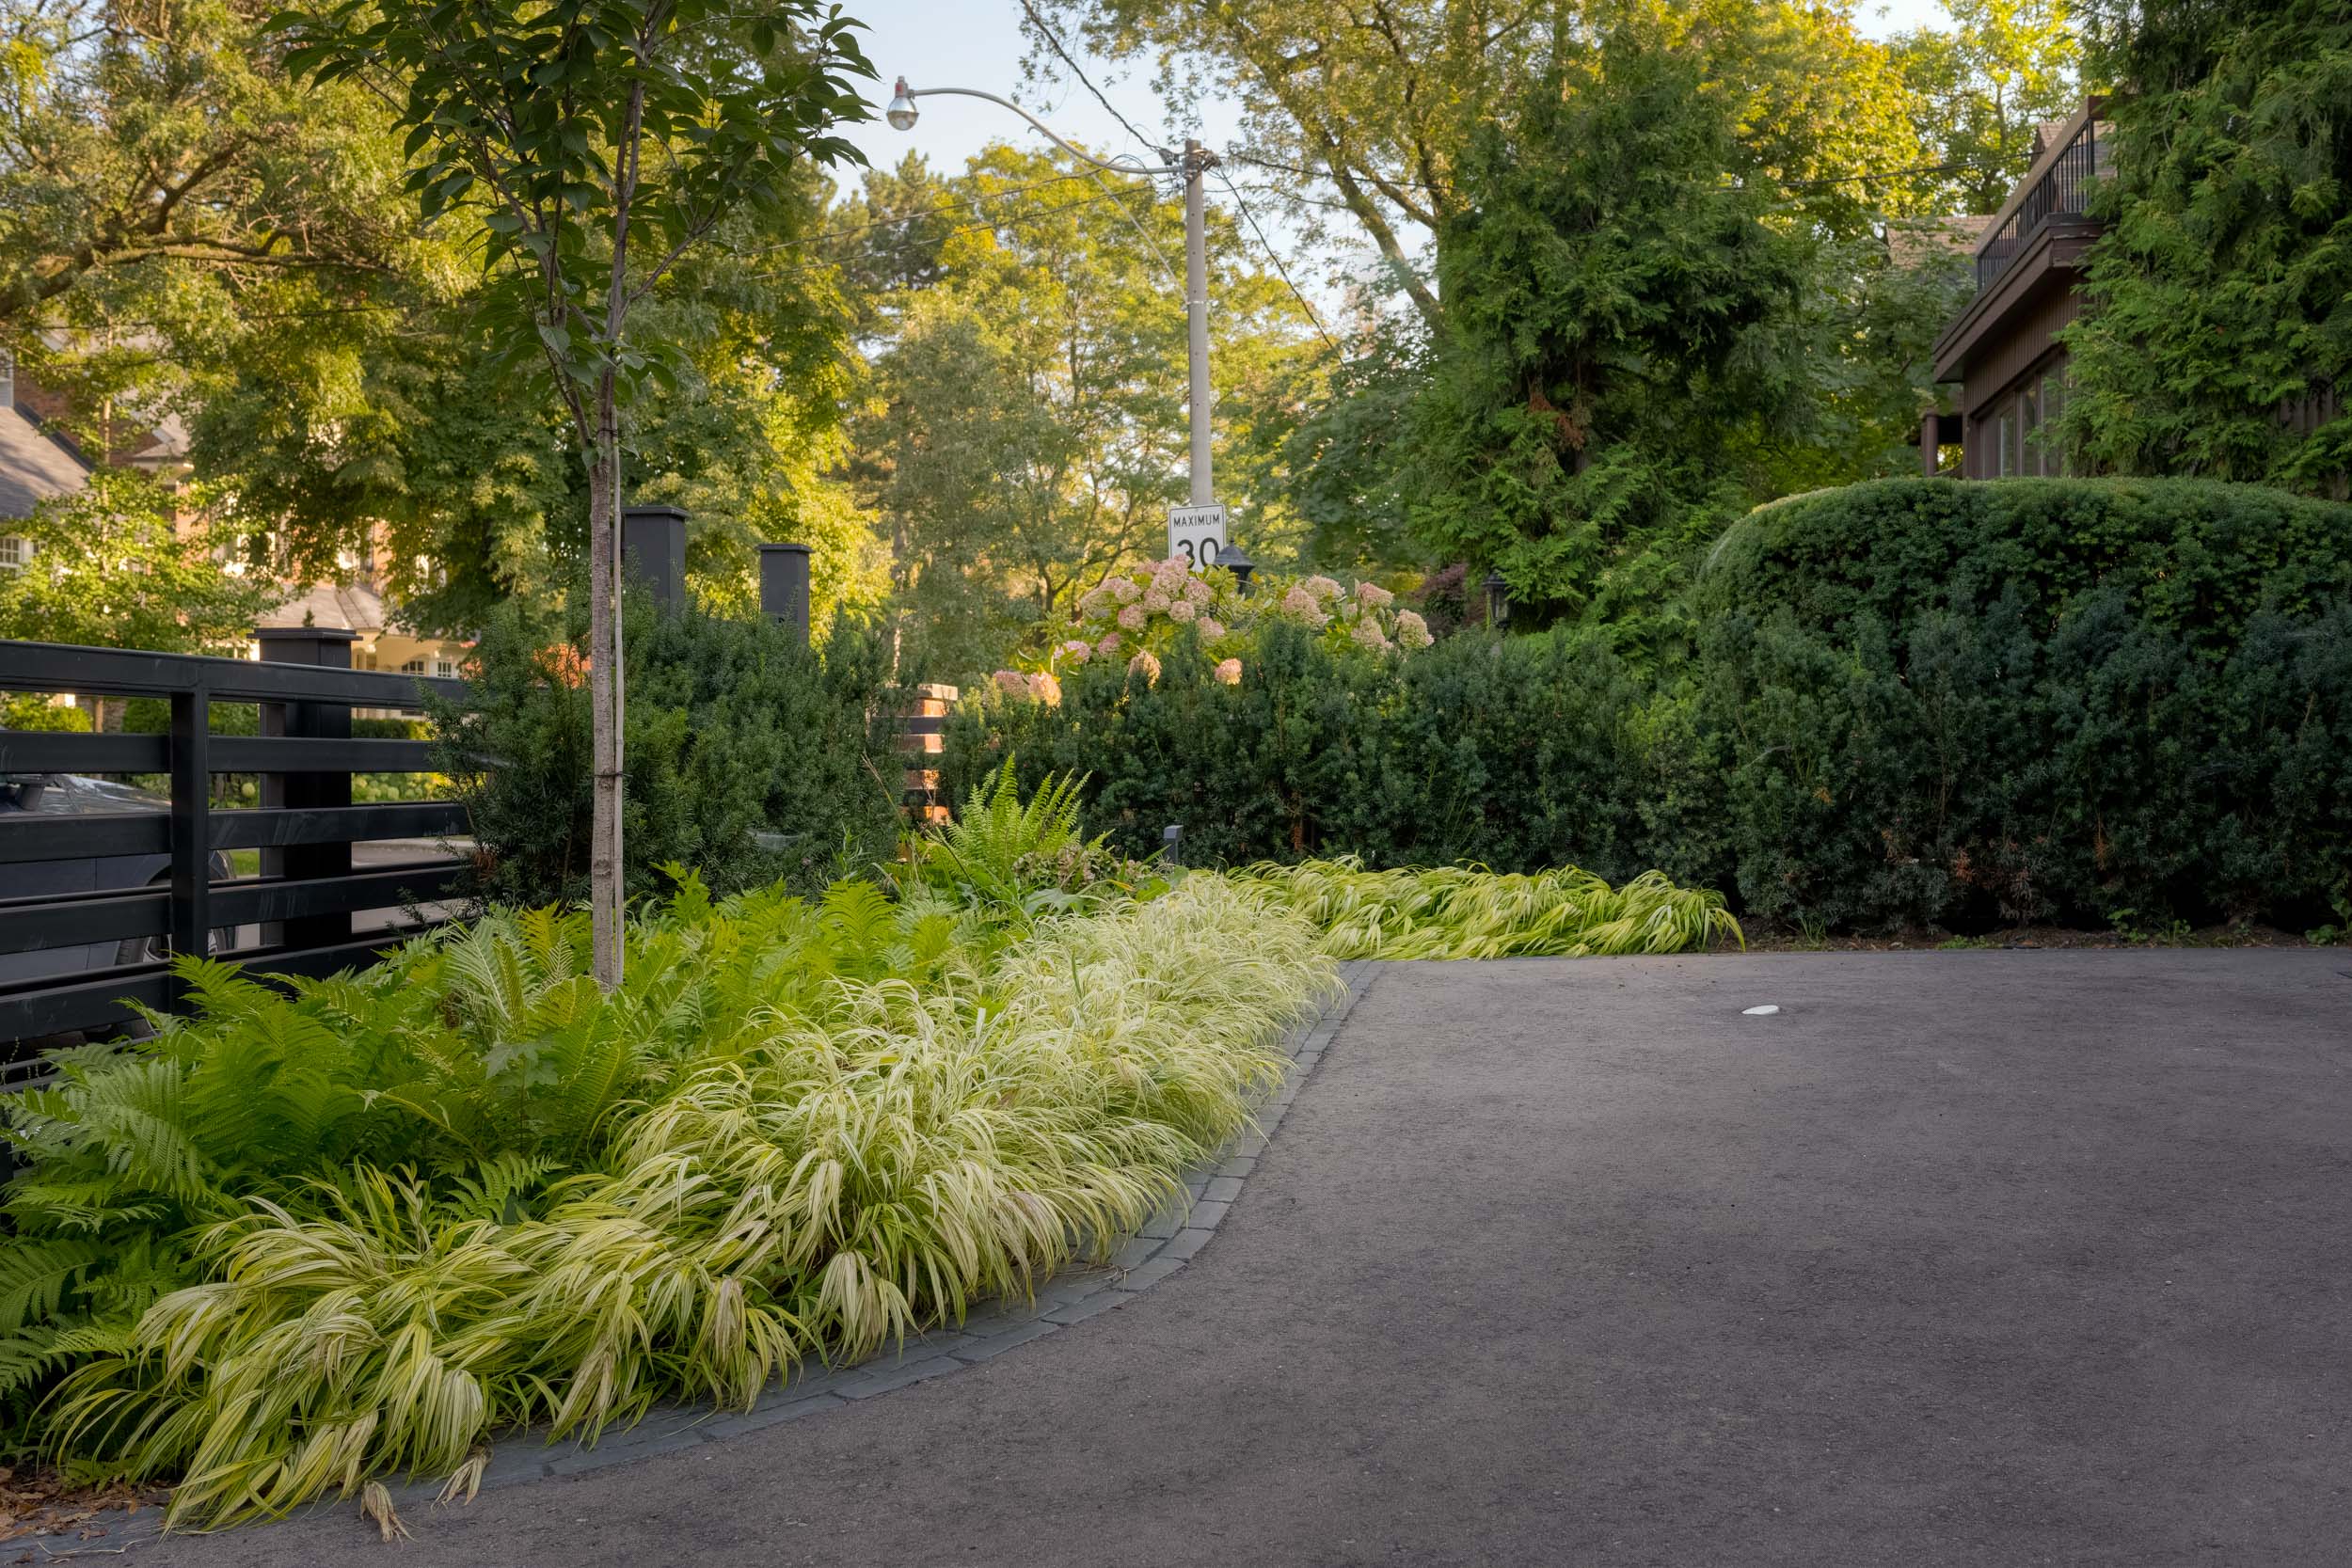 modern metal fencing surrounds a parking pad lined with ornamental grasses